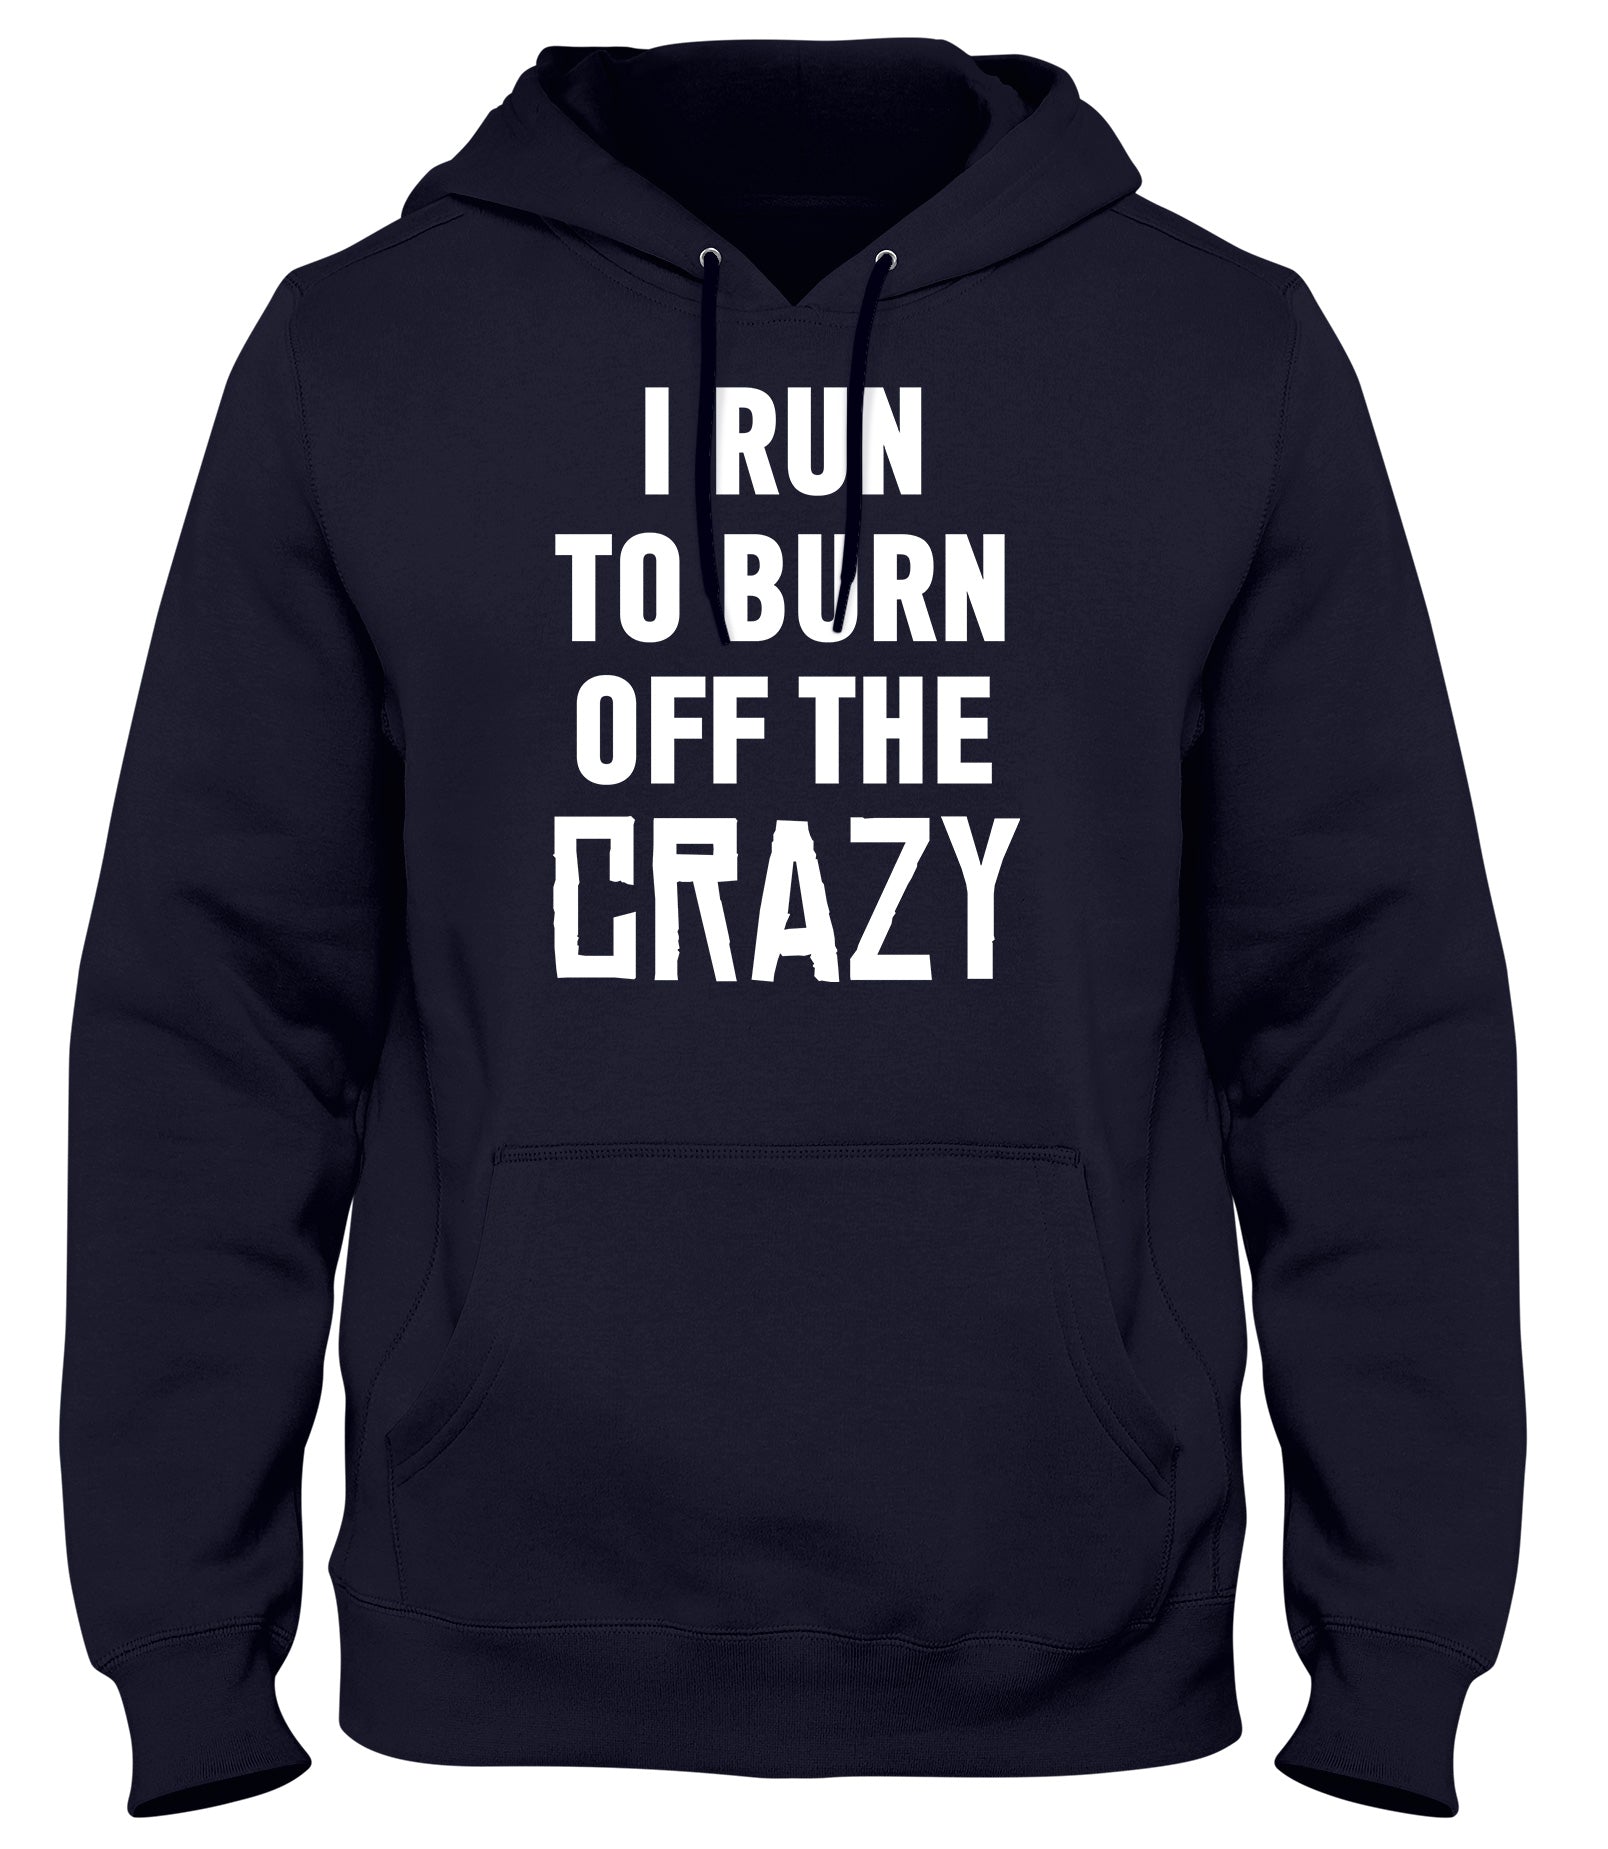 I RUN TO BURN OFF THE CRAZY FUNNY MENS LADIES WOMENS UNISEX HOODIE